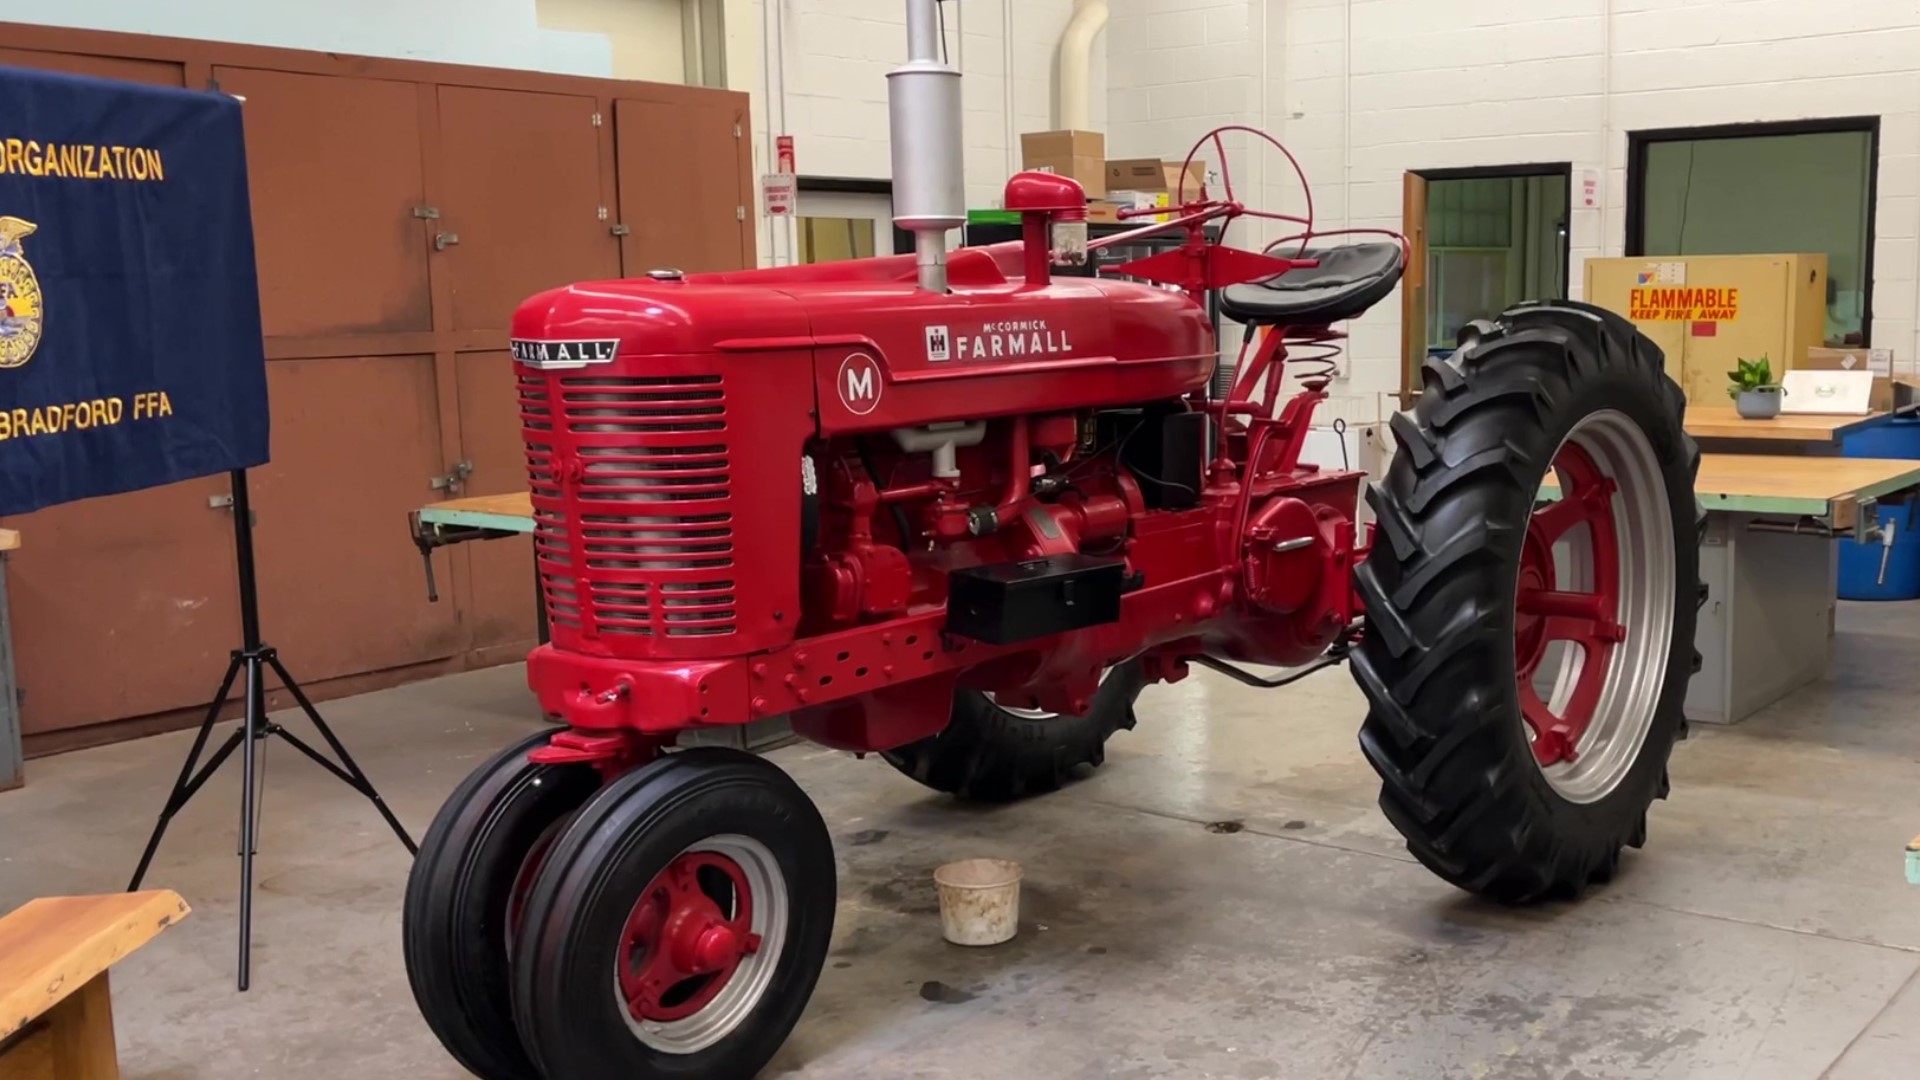 A 1941 Farmall is running again, thanks to the determination of the high school students who restored it.